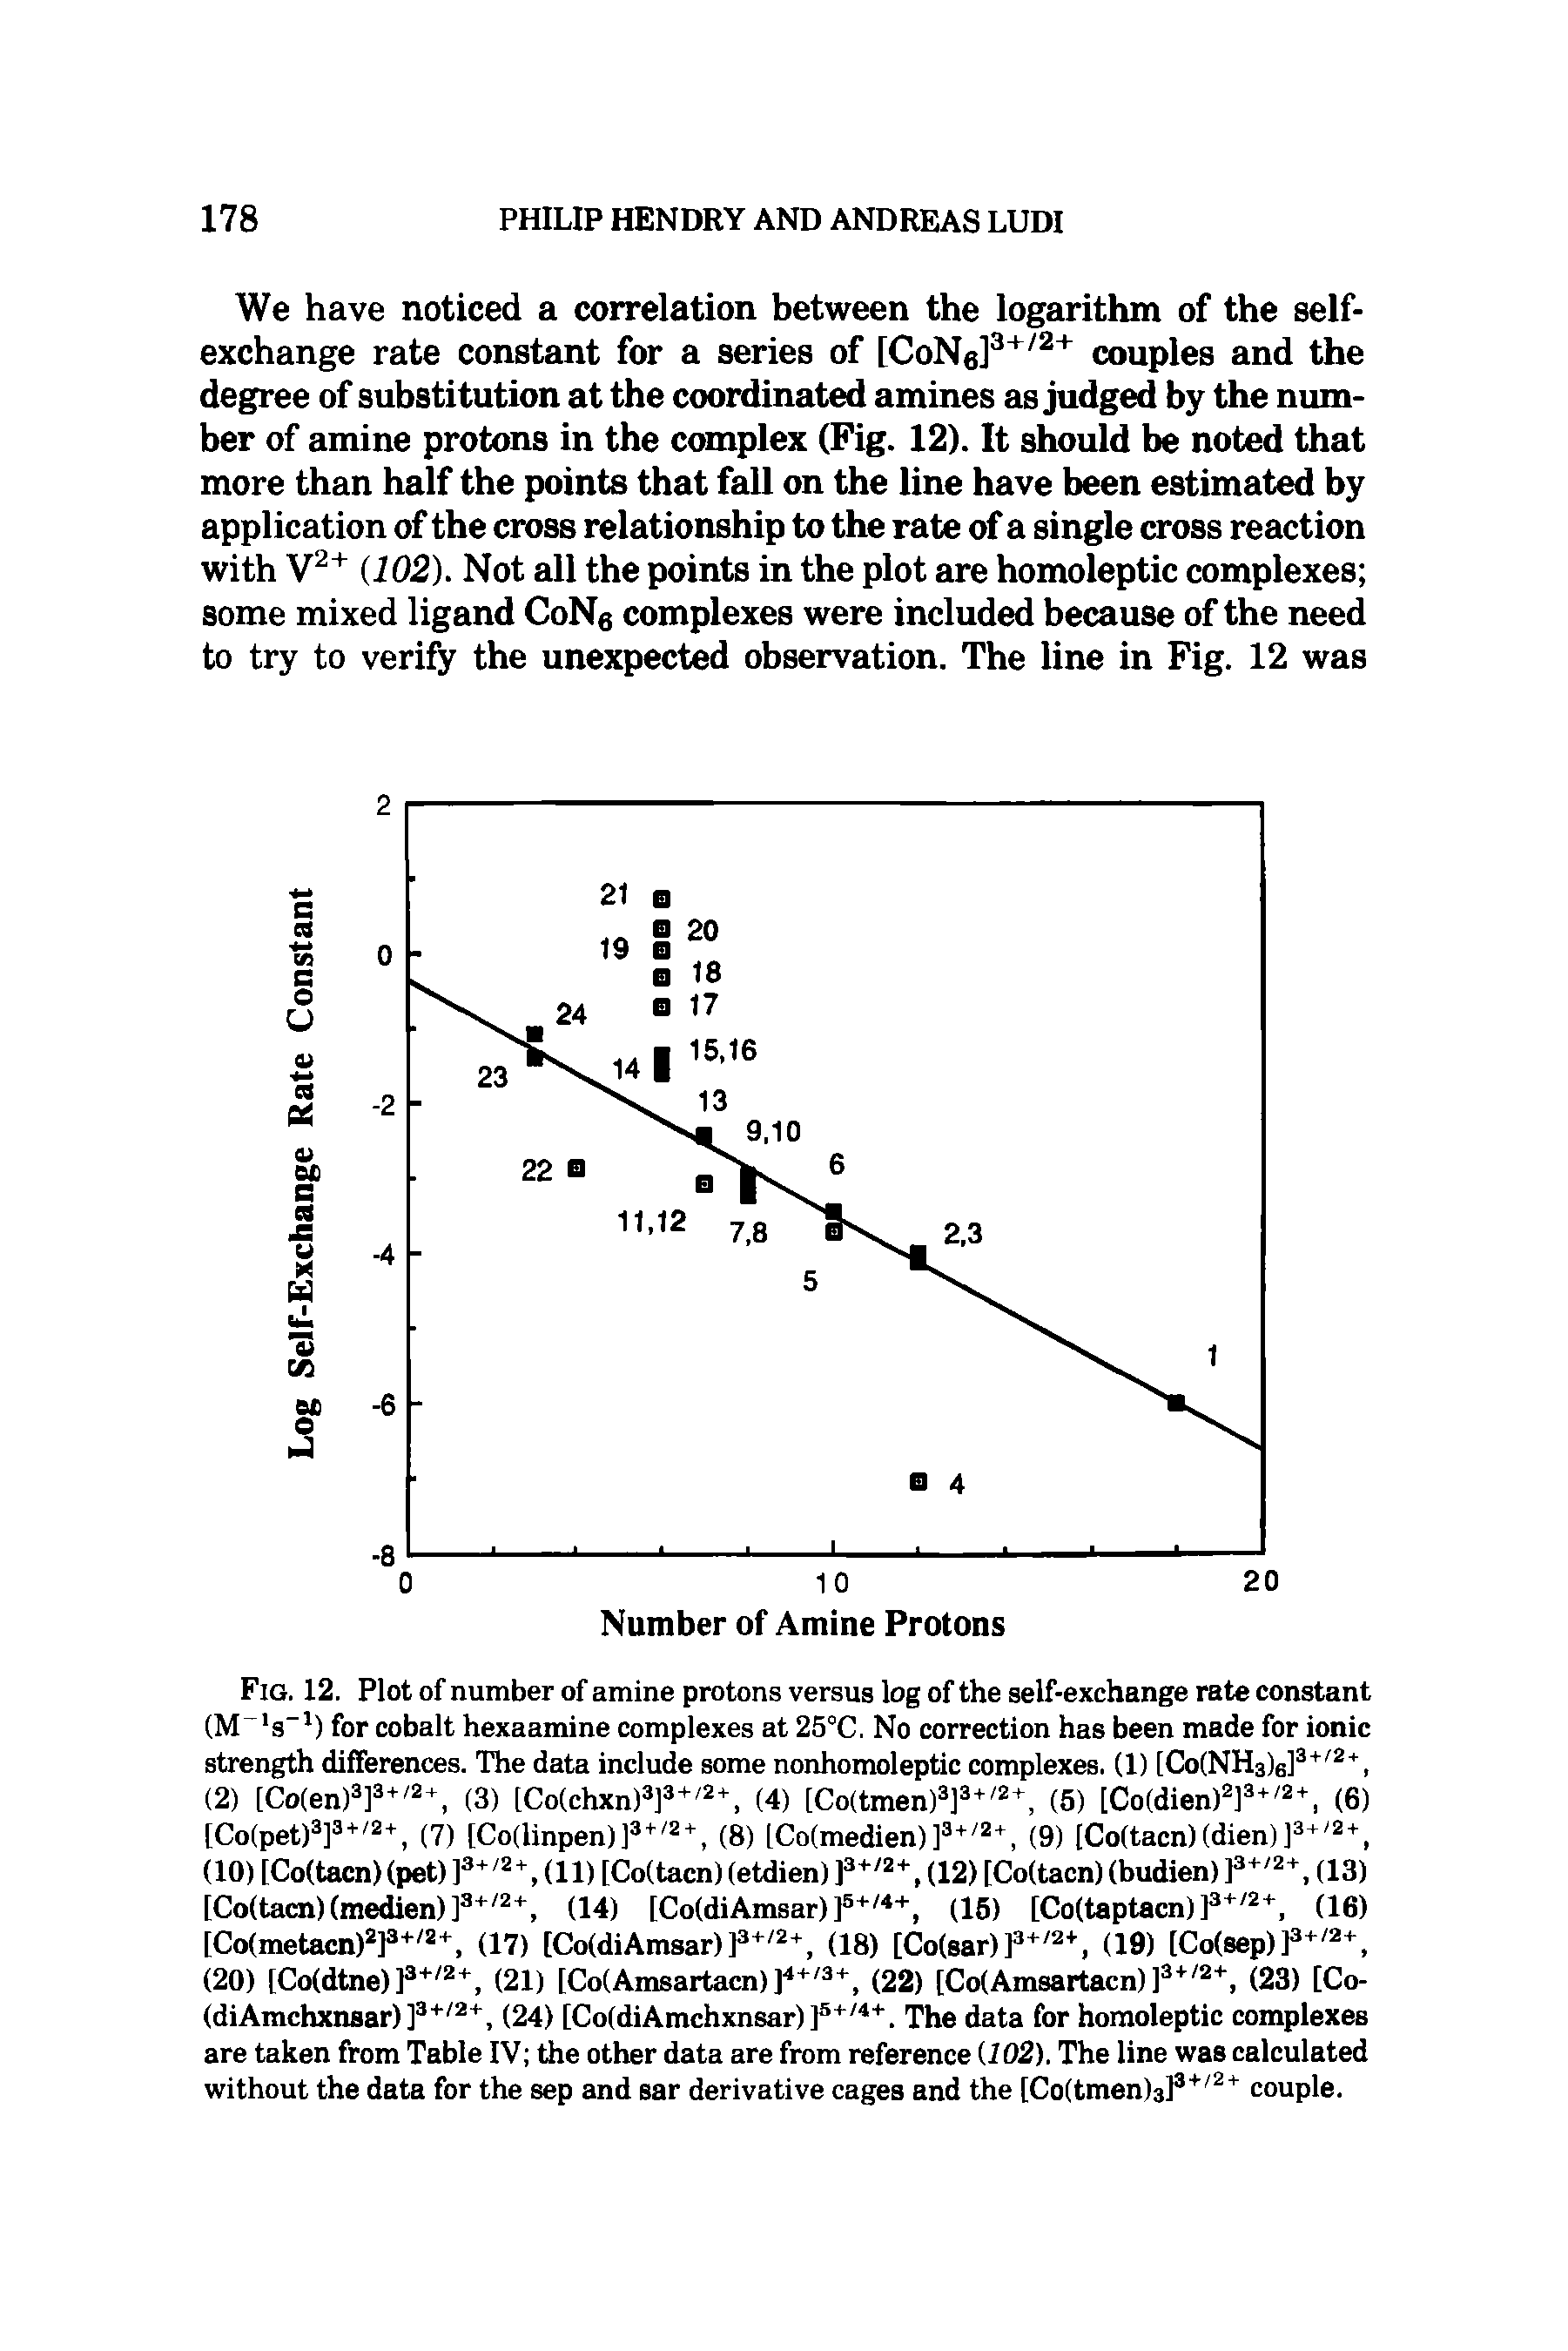 Fig. 12. Plot of number of amine protons versus log of the self-exchange rate constant (M s ) for cobalt hexaamine complexes at 25°C. No correction has been made for ionic strength differences. The data include some nonhomoleptic complexes. (1) [CoCNHslg], (2) [Co(en)3]3+ 2+, (3) [Co(chxn) ] + 2+ (4) [Co(tmen) ]3+ 2+, (5) [Co(dien)"]"+ 2+, (6) [Co(pet) P+ 2+, (7) [Co(linpen)P" 2 + (g) lCo(medien)(9) [Co(tacn)(dien)]3+ 2+, (10) [Co(tacn) (pet) (11) [Co(tacn) (etdien) (12) [Co(tacn) (budien) p+ 2+ 3 [Co(tacn)(medien)P, (14) [Co(diAmsar)] , (15) [Co(taptacn)P, (16) [Co(metacn) ] 2+, (17) [Co(diAmsar)P 2+, (18) [Co(sar)(19) [Co(sep)P 2, (20) [Co(dtne)] , (21) [Co(Amsartacn)], (22) [Co(Amsartacn)] , (23) [Co-(diAmchxnsar)] , (24) [Co(diAmchxnsar)] . The data for homoleptic complexes are taken from Table IV the other data are from reference U02). The line was calculated without the data for the sep and sar derivative cages and the [Coftmenls] couple.